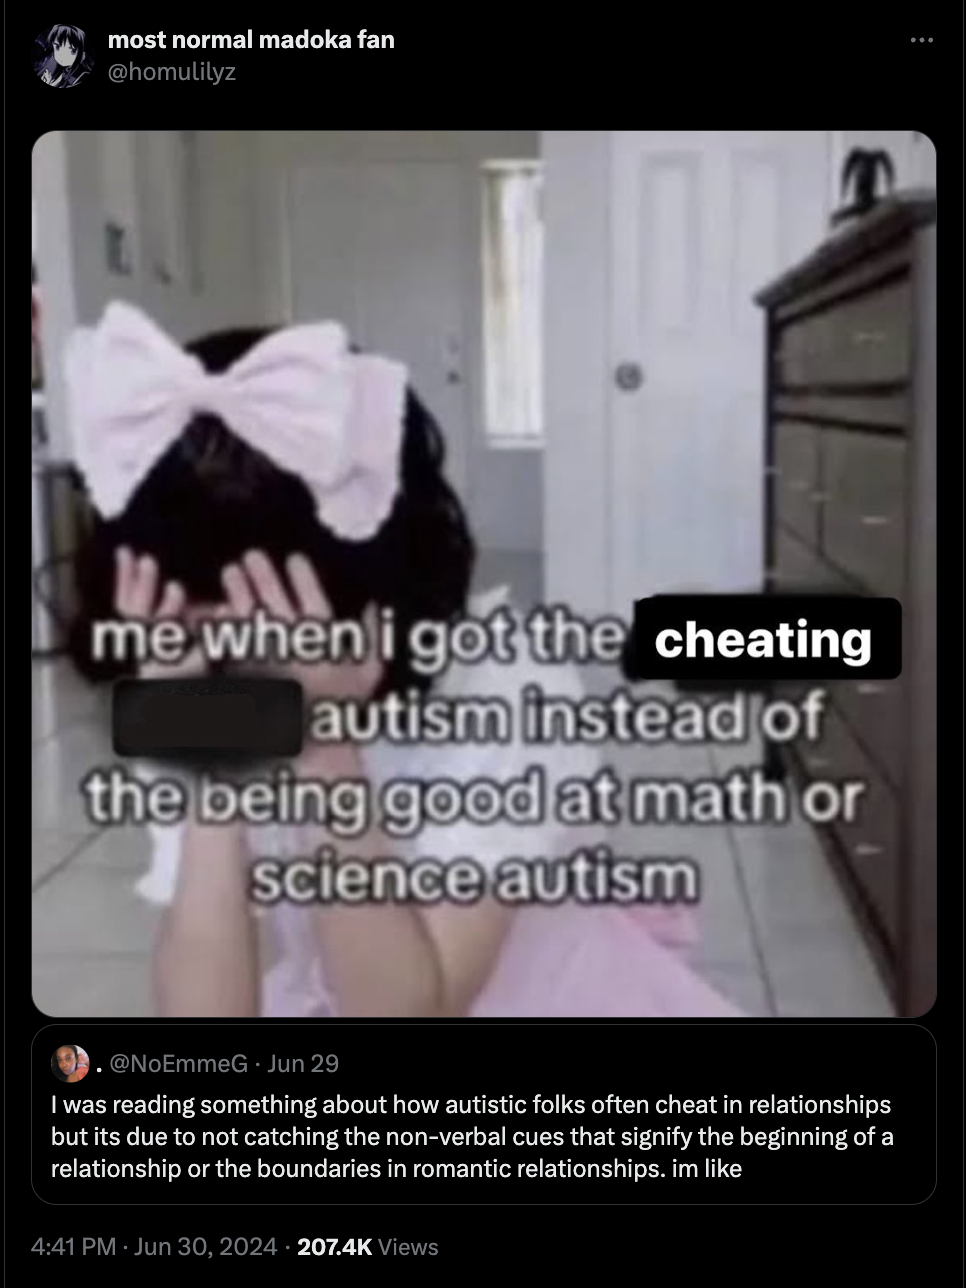 me when i got the autism instead - most normal madoka fan me when i got the cheating autism instead of the being good at math or science autism . 29 I was reading something about how autistic folks often cheat in relationships but its due to not catching